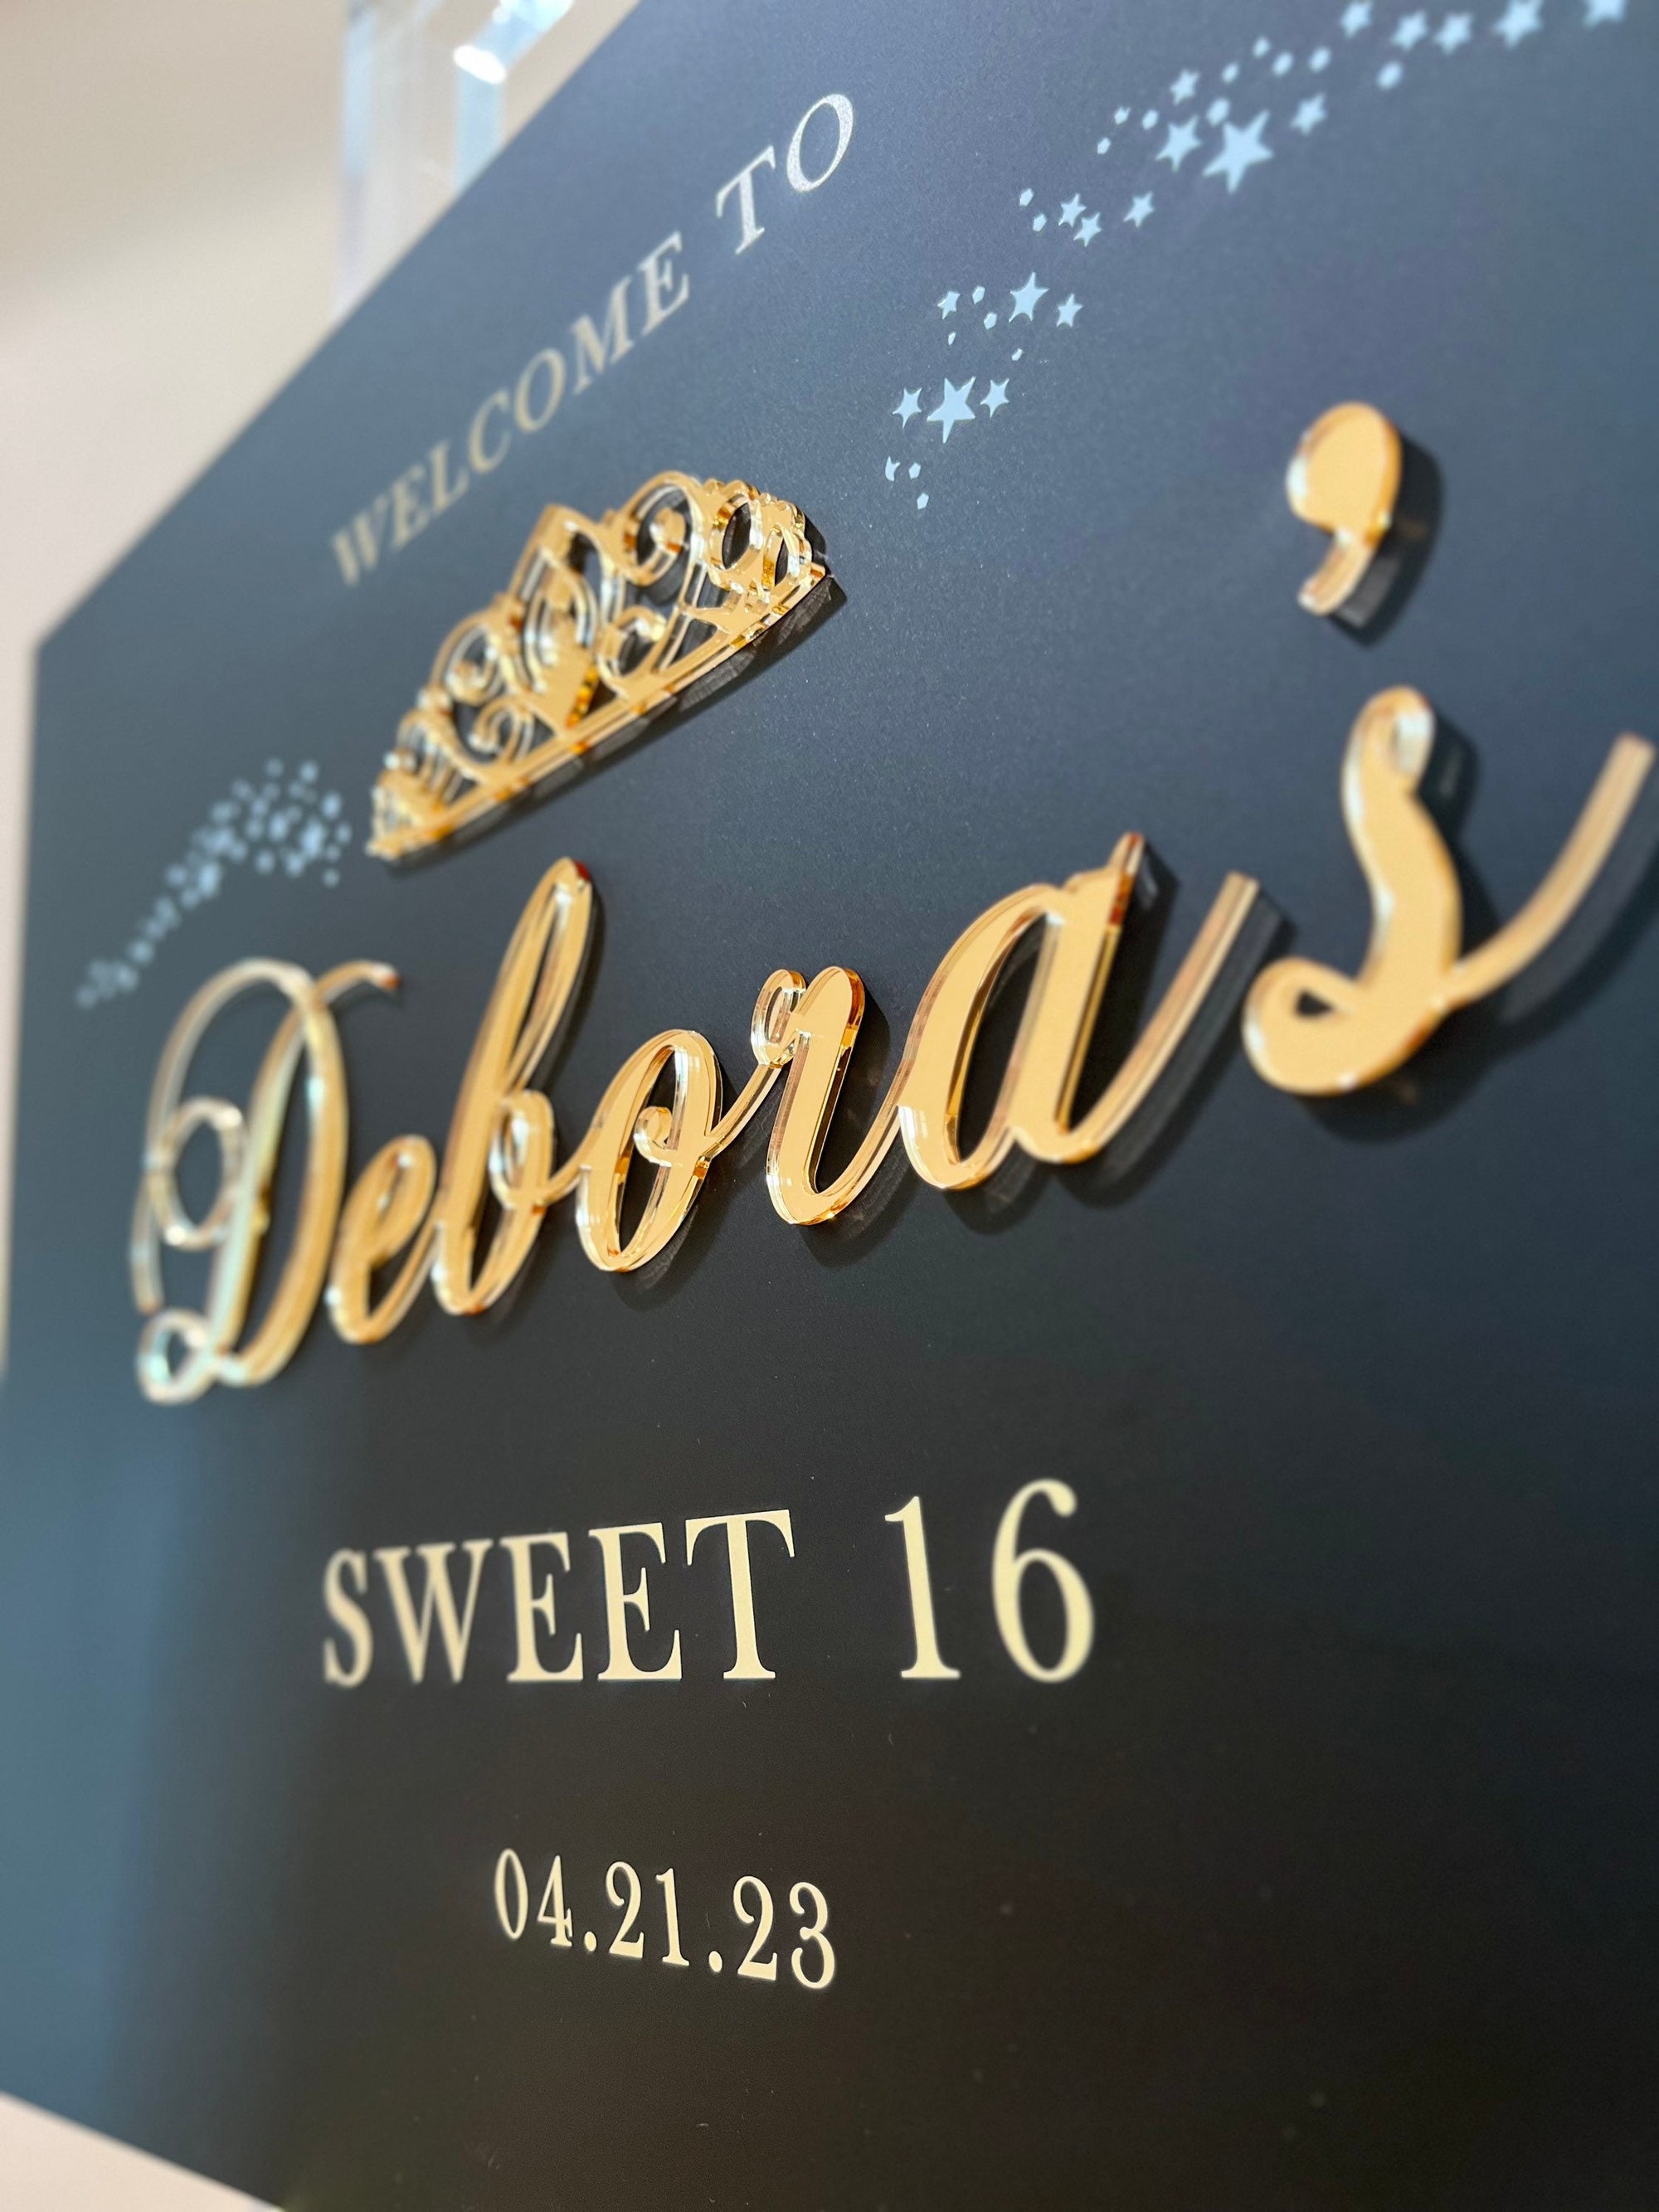 3DF36-ES1 3D Quinceanera Event Entry Signs with Laser Cut Wording - Sign Sizes 18"x24" or 24"x36"